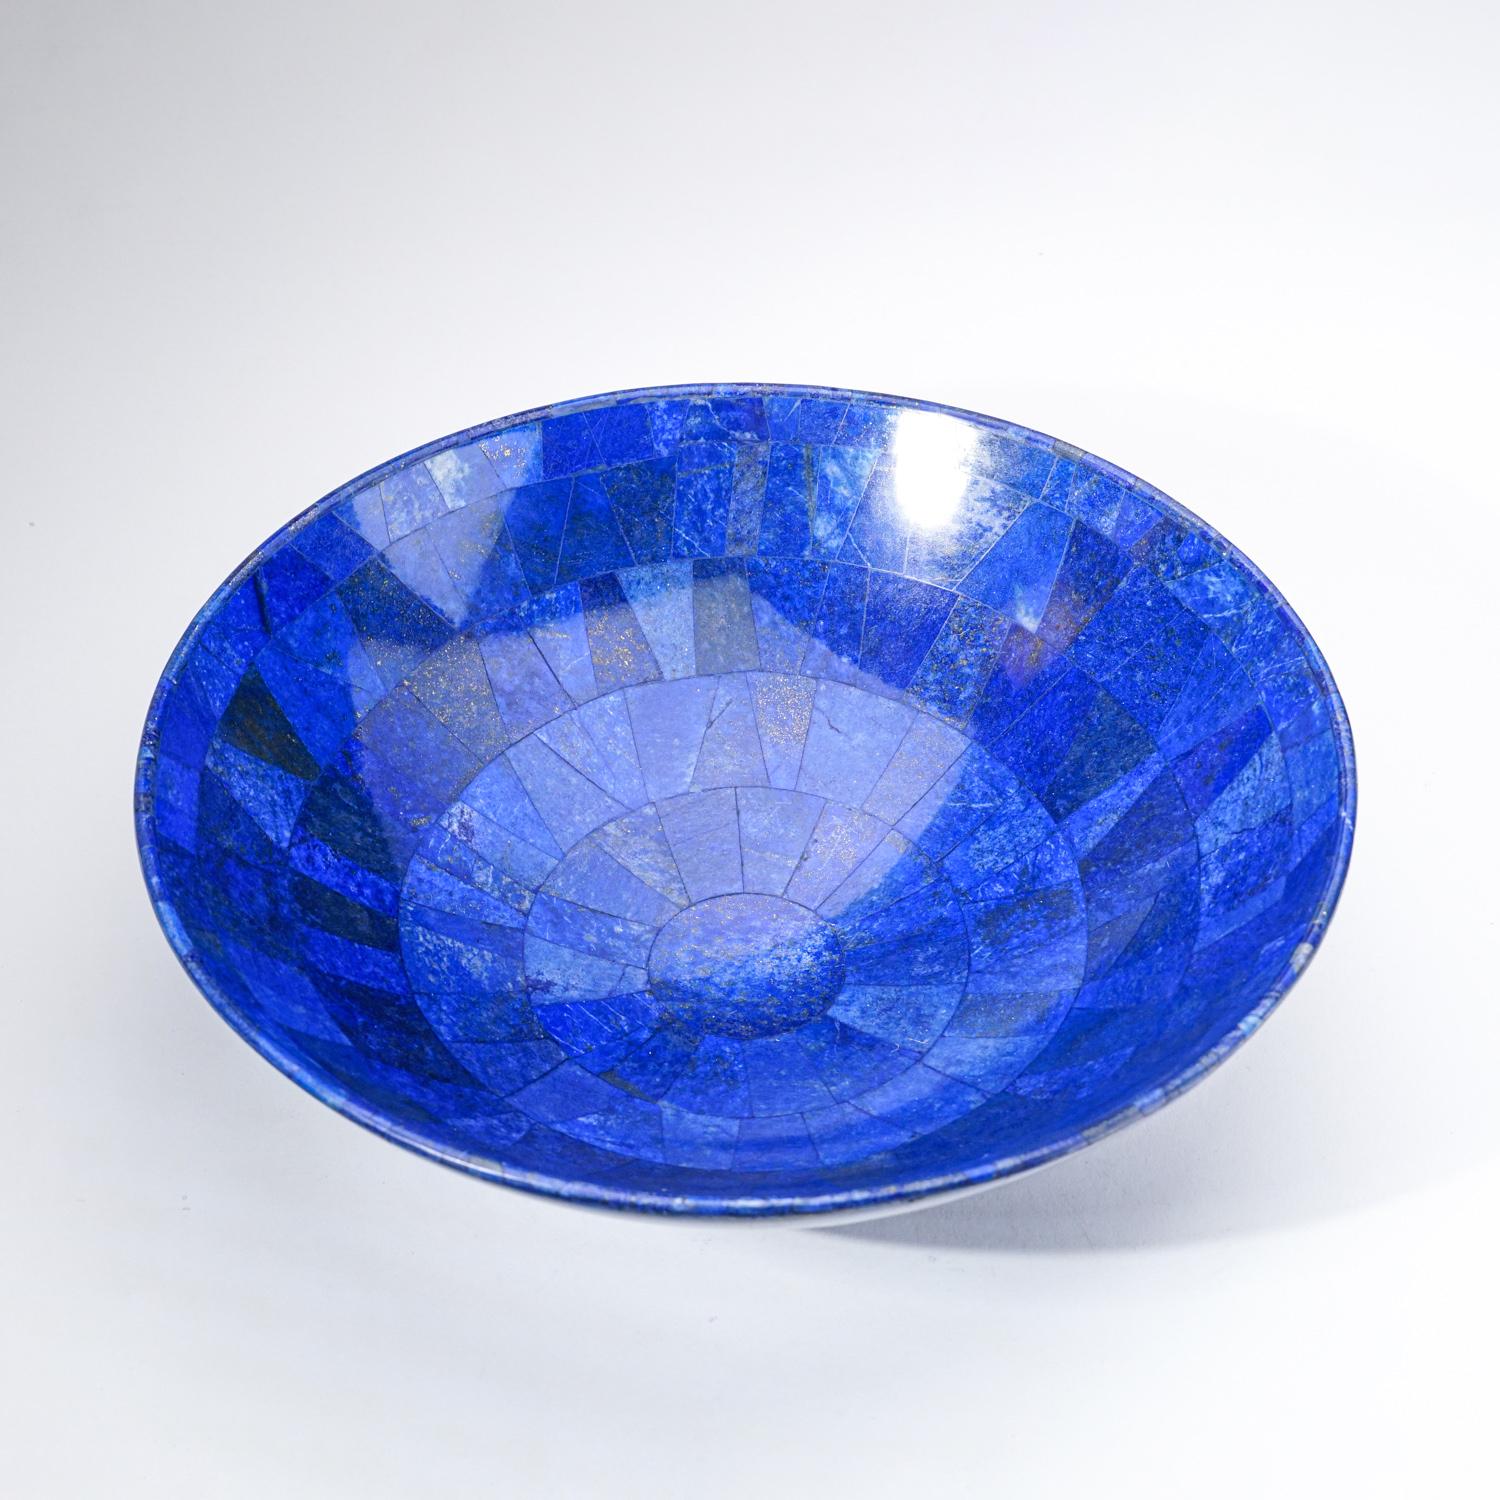 AAA quality hand-polished natural Lapis Lazuli bowl from Afghanistan.  This specimen has rich, electric-royal blue color enriched with scintillating pyrite microcrystals. This extra grade lapis bowl is a wonderful example and would make a lovely